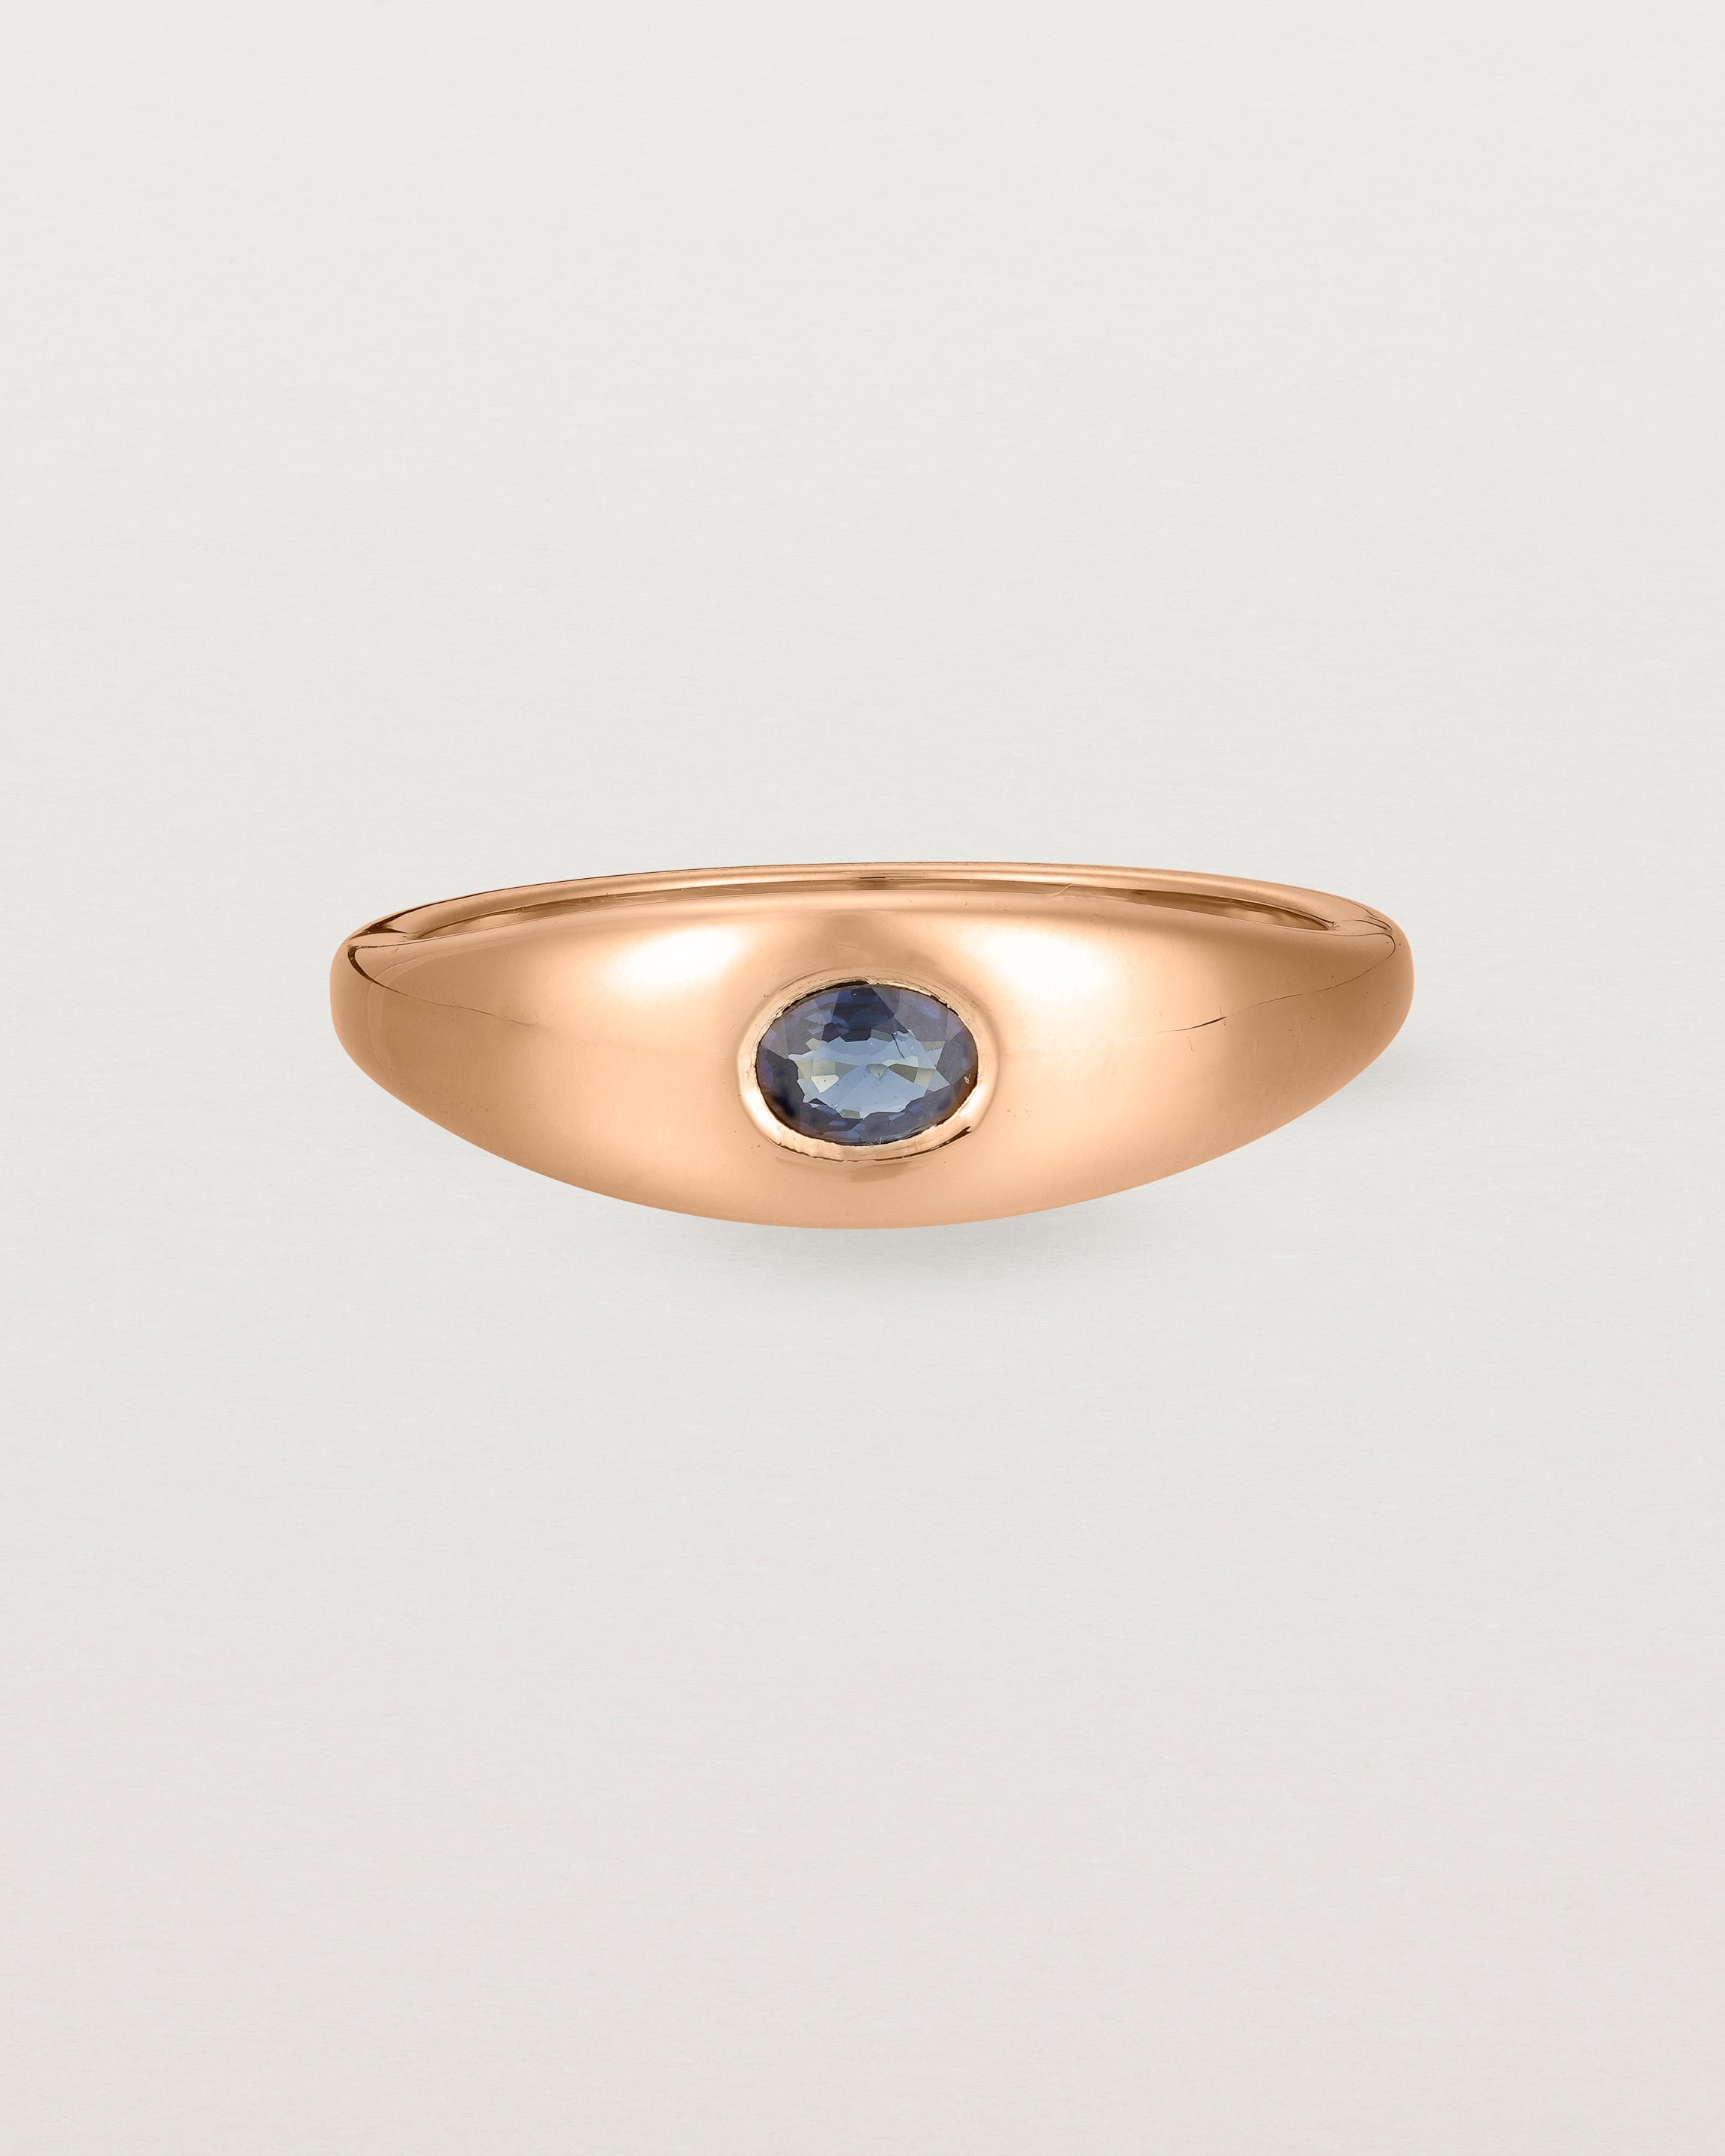 Front view of the Seule Single Ring | Australian Sapphire | Rose Gold.